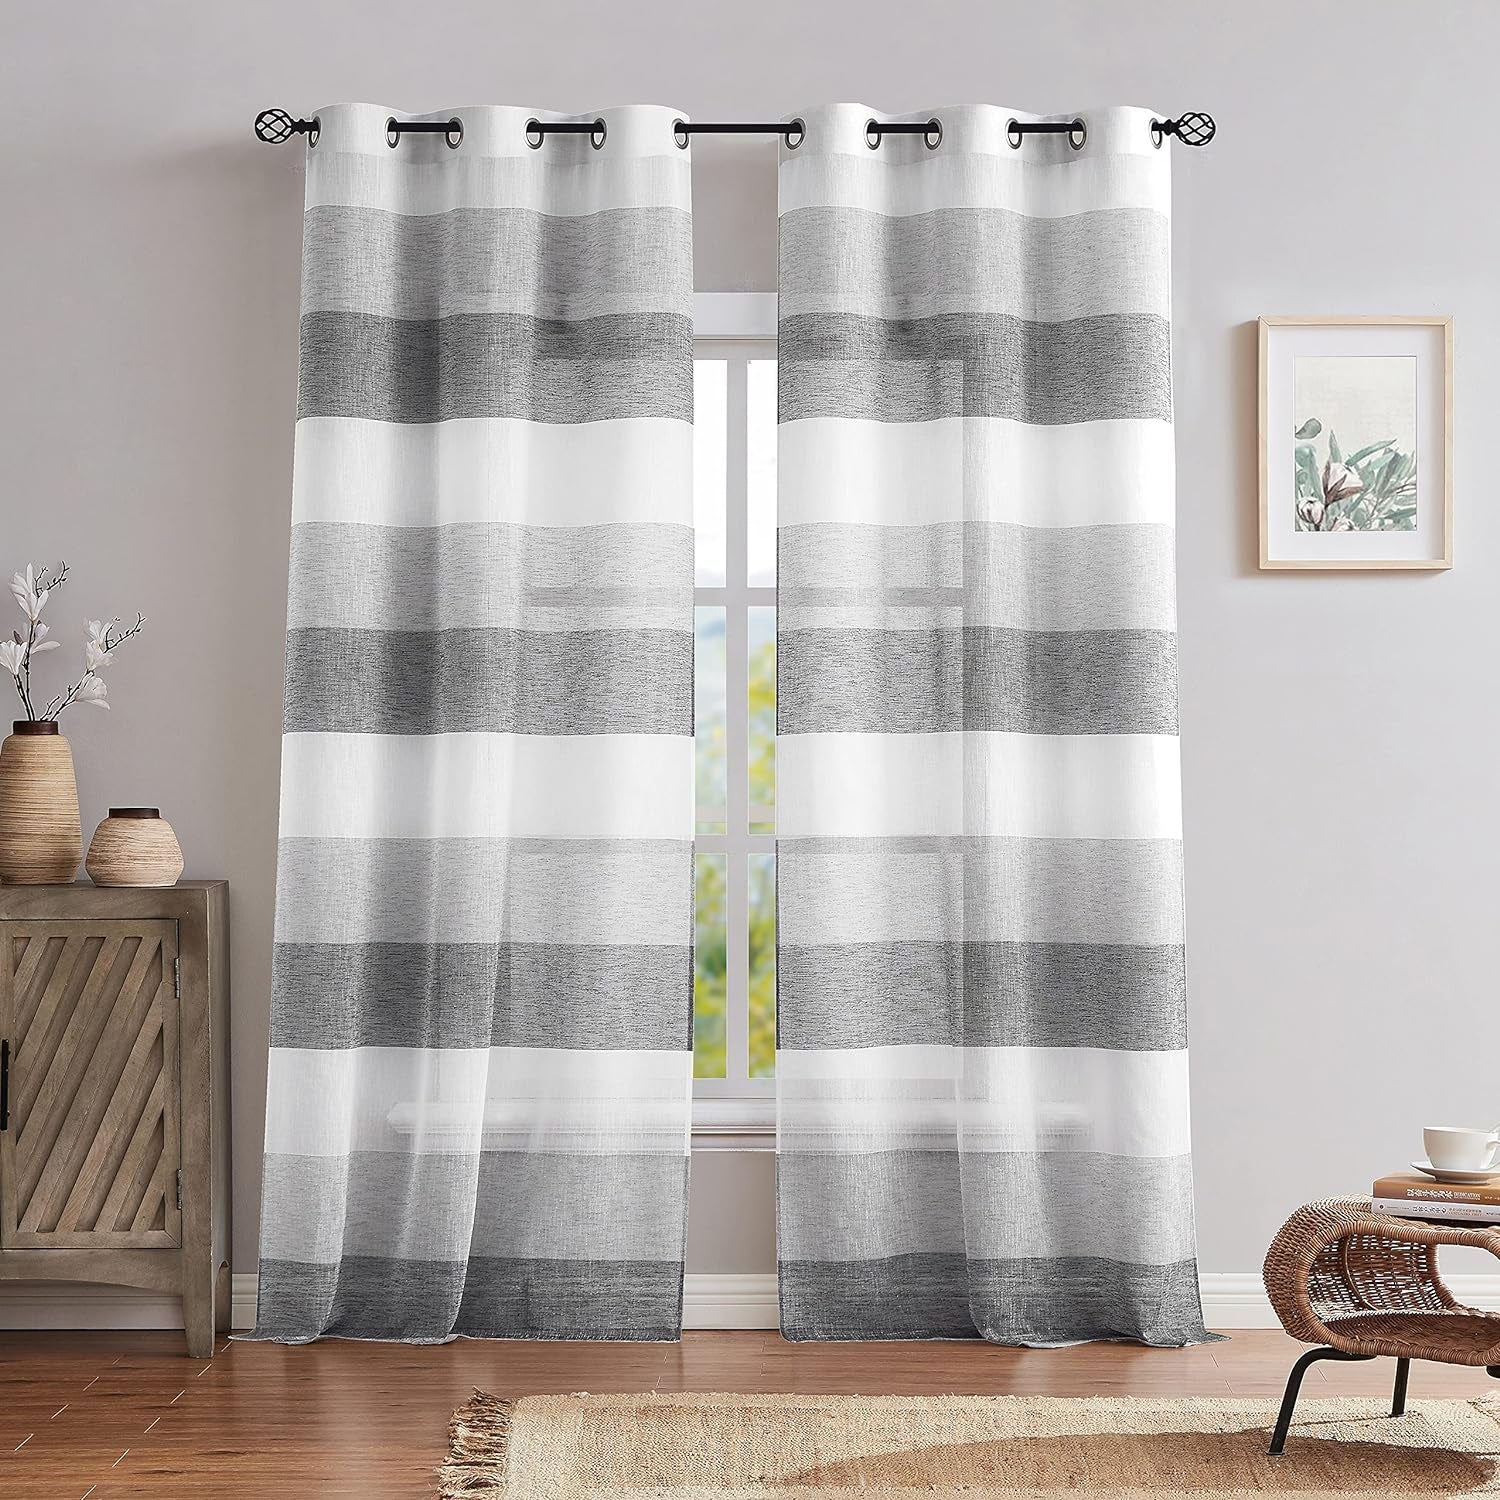 Central Park Gray Tan Stripe Sheer Color Block Window Curtain Panel Linen Window Treatment for Bedroom Living Room Farmhouse 84 Inches Long with Grommets, 2 Panel Rustic Drapes  Central Park Gray/Charcoal 40"X63"X2 